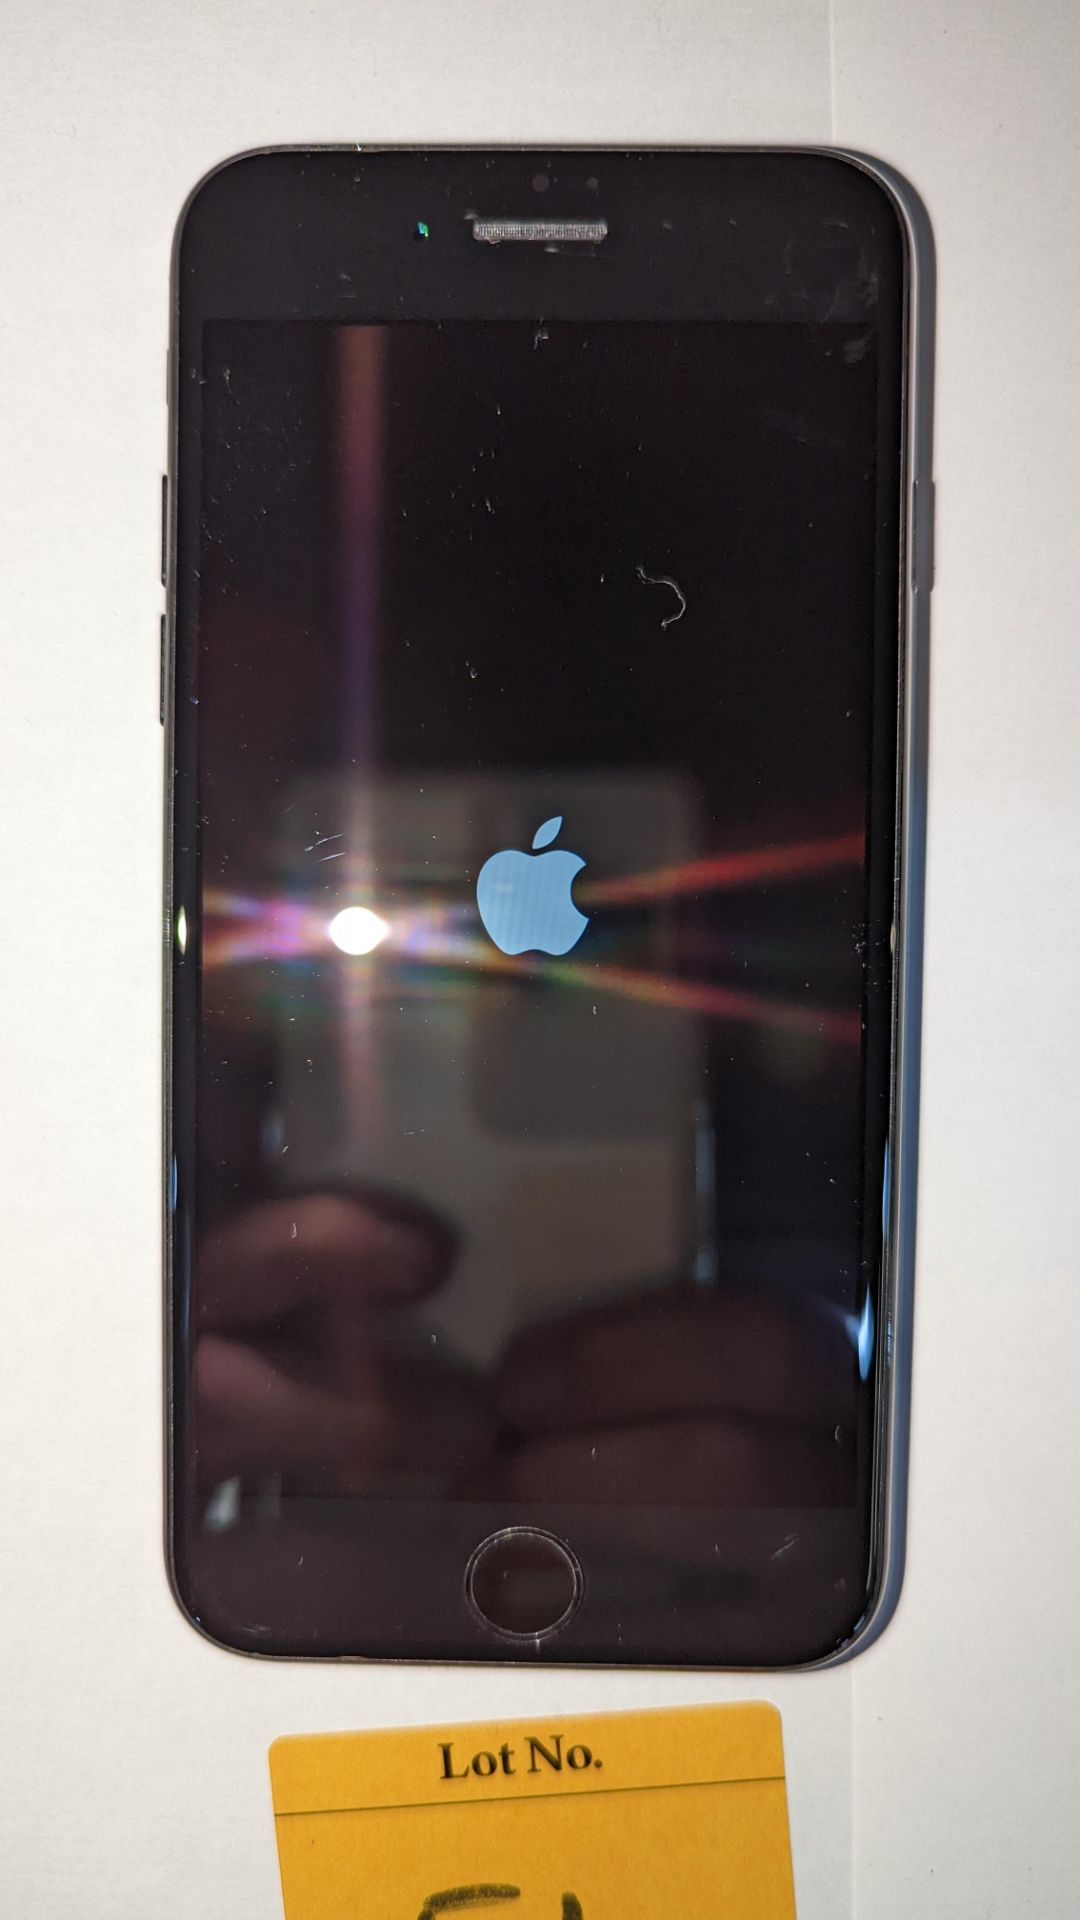 Apple iPhone 7, 32GB capacity, model A1778. No ancillaries or accessories - Image 12 of 13